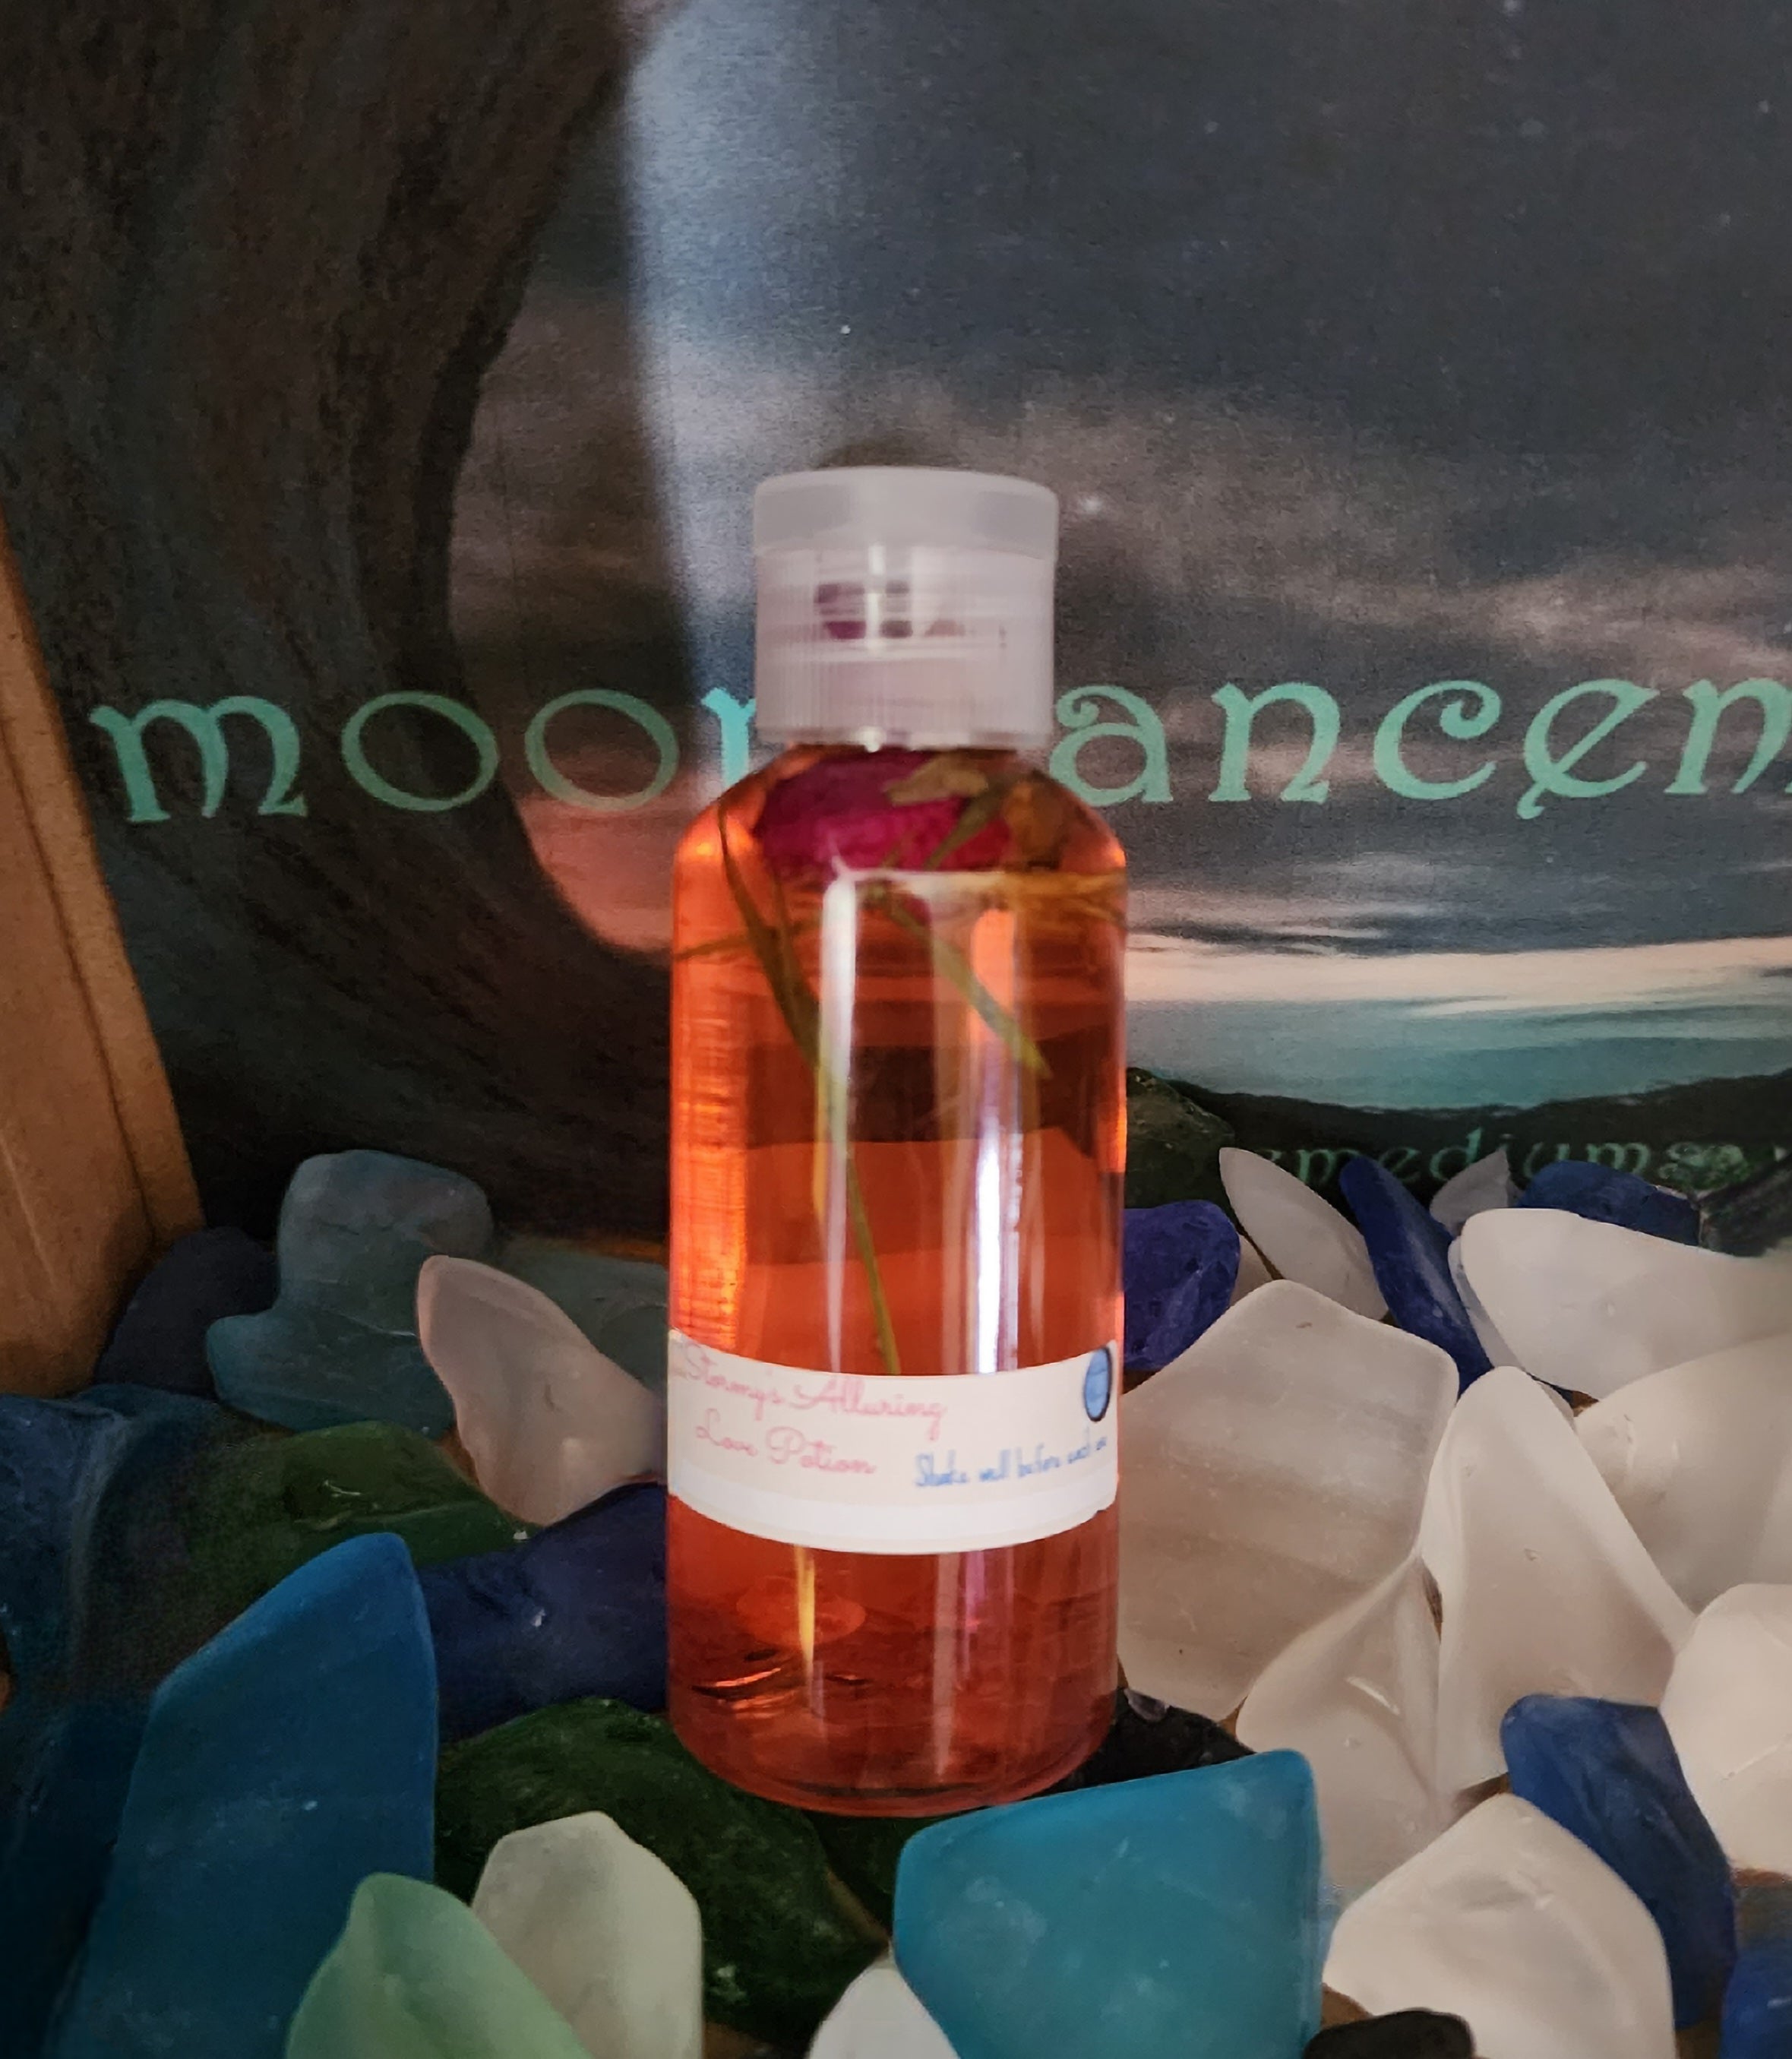 Stormy's Alluring Love Potion - Strong Potion for Attraction & Love Connection!